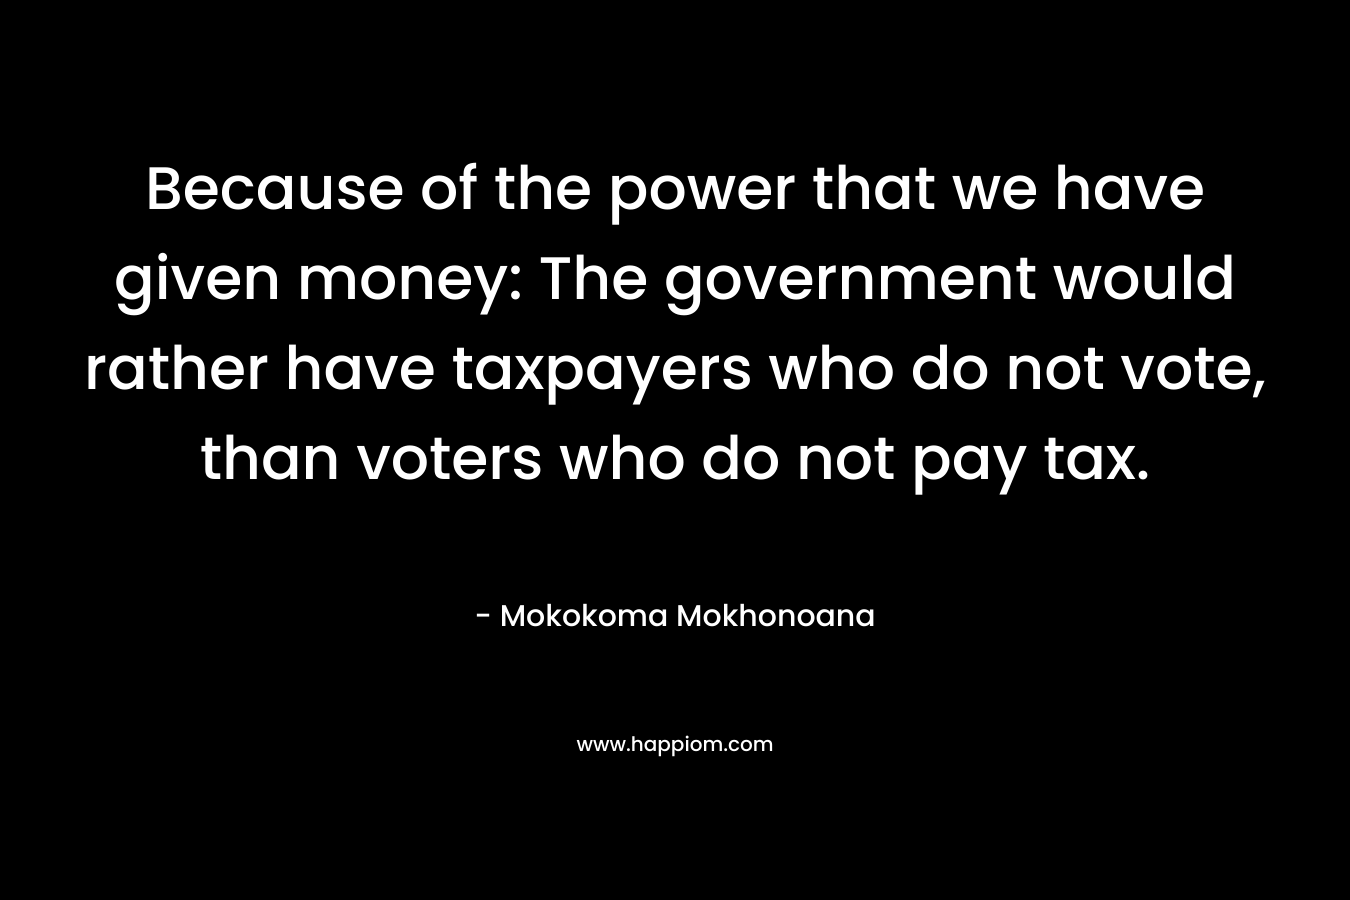 Because of the power that we have given money: The government would rather have taxpayers who do not vote, than voters who do not pay tax.